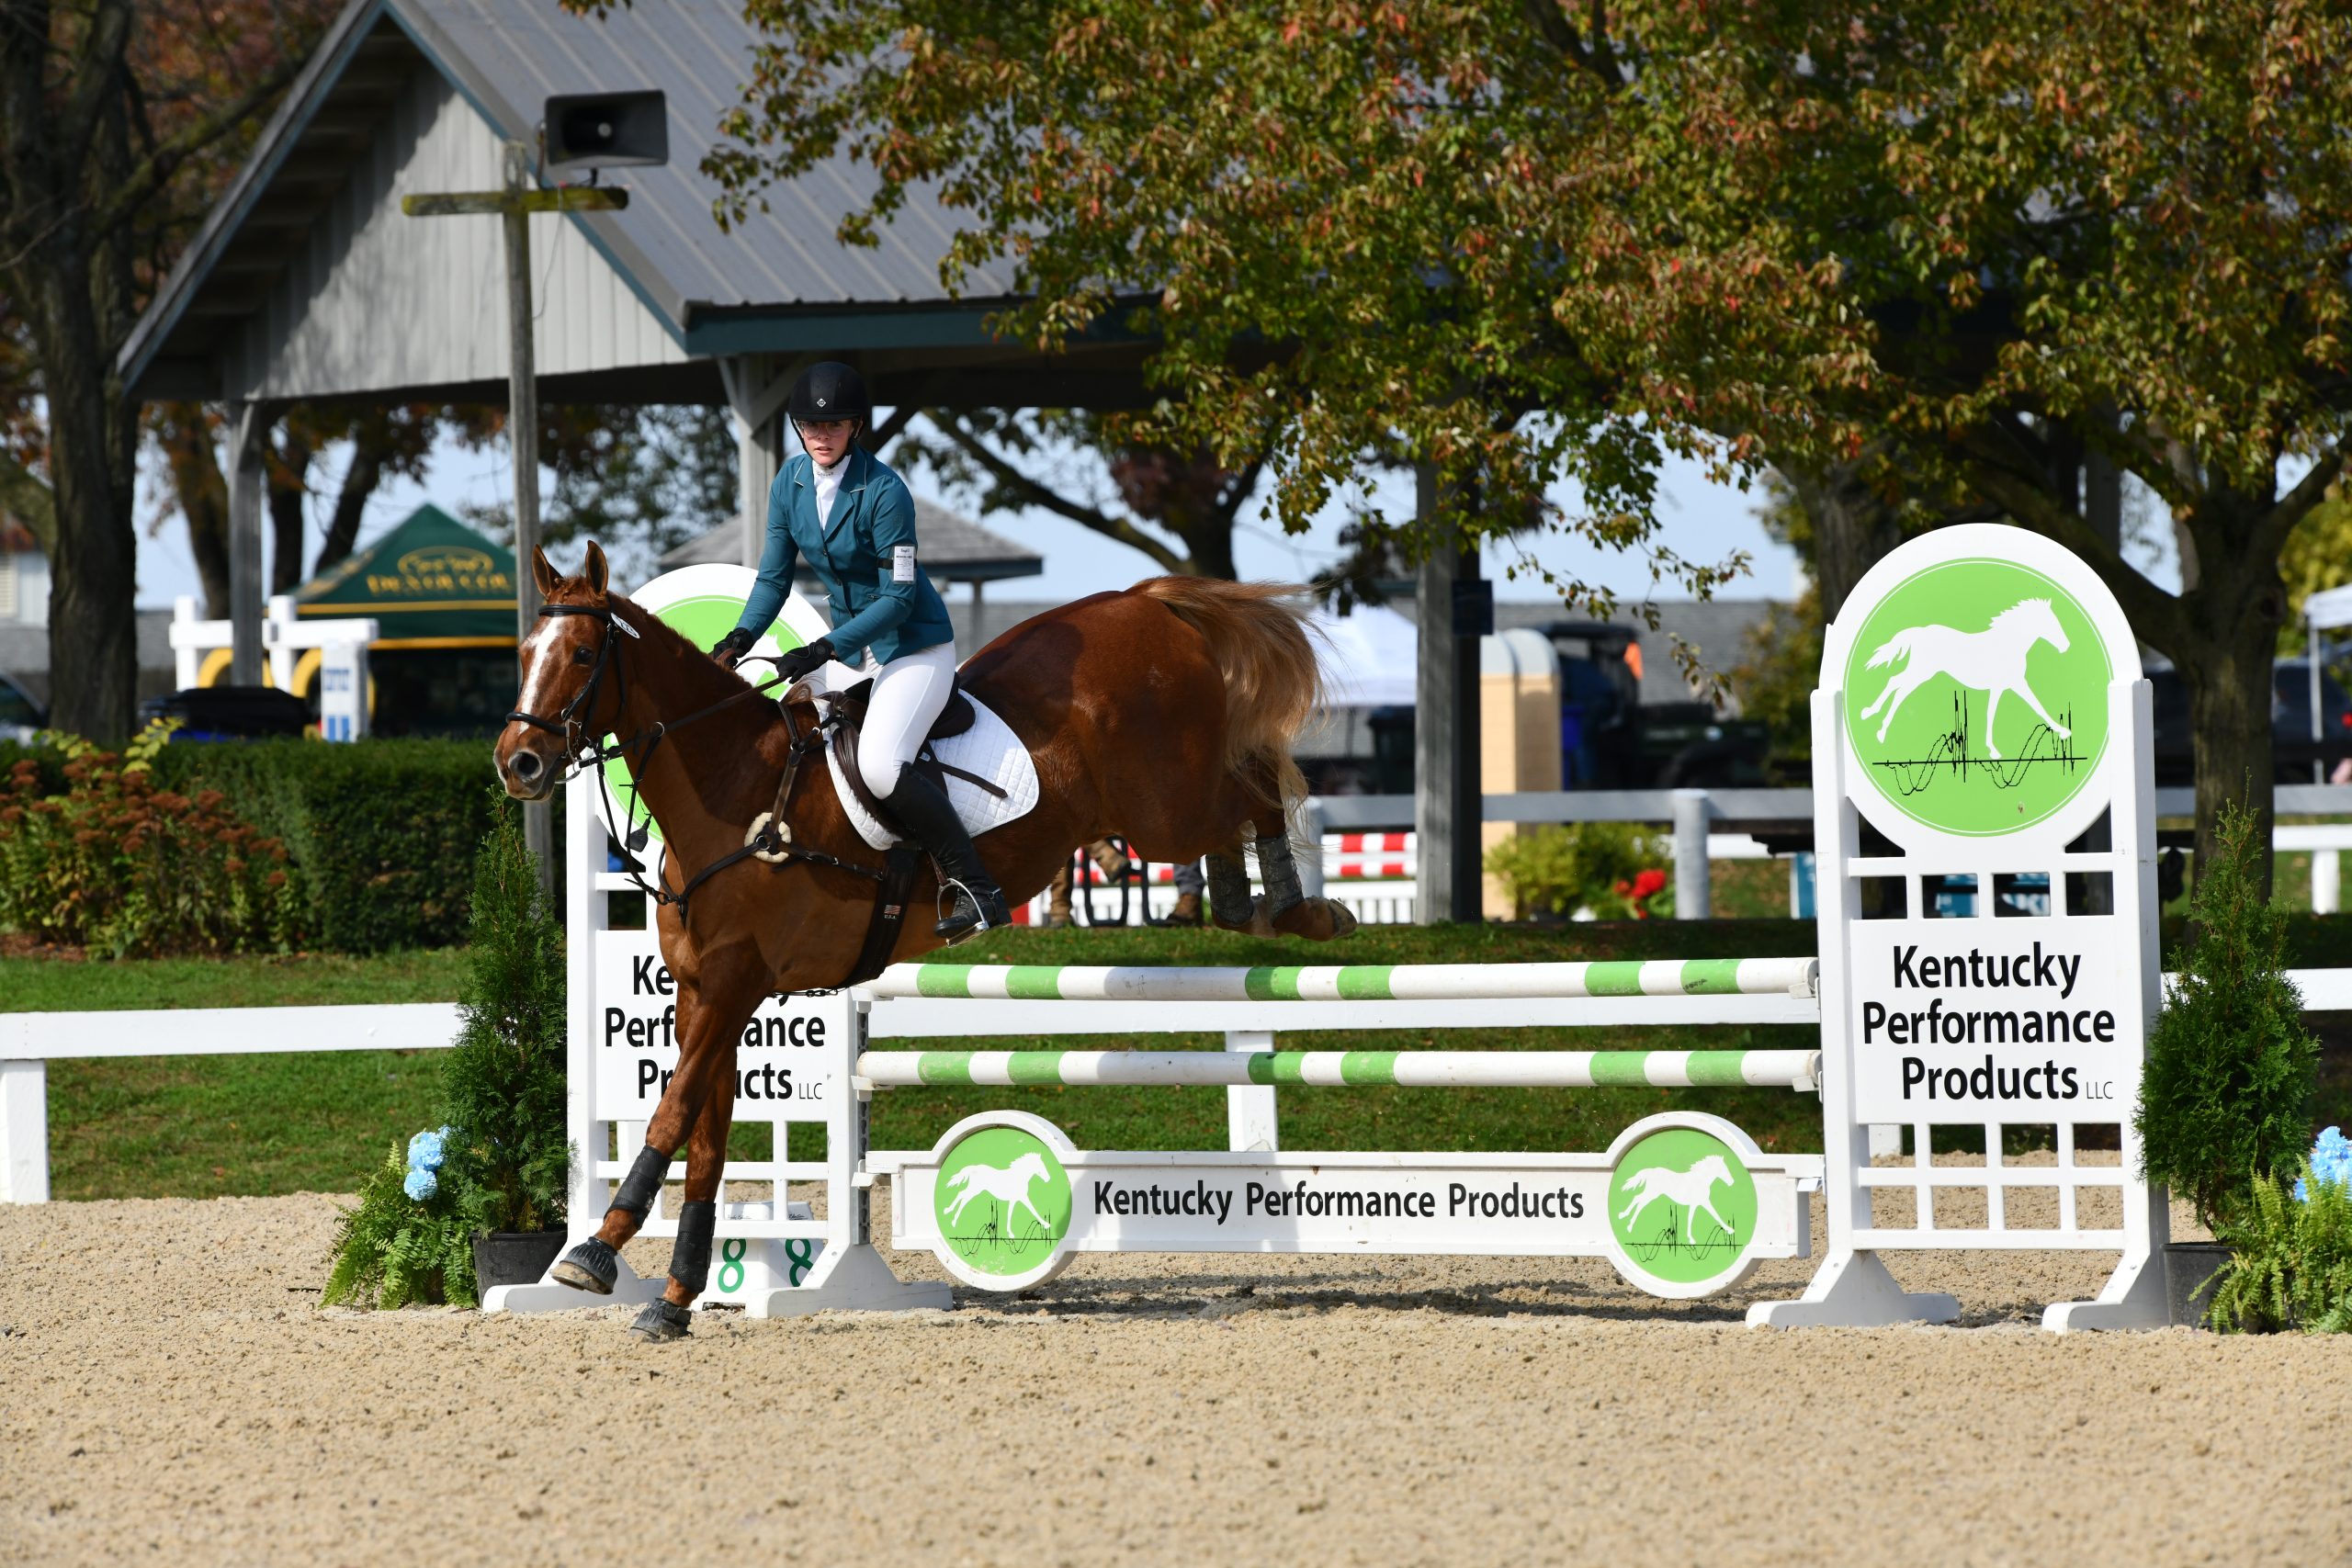 Transylvania pair takes the lead in saddlebred horse eventing participation